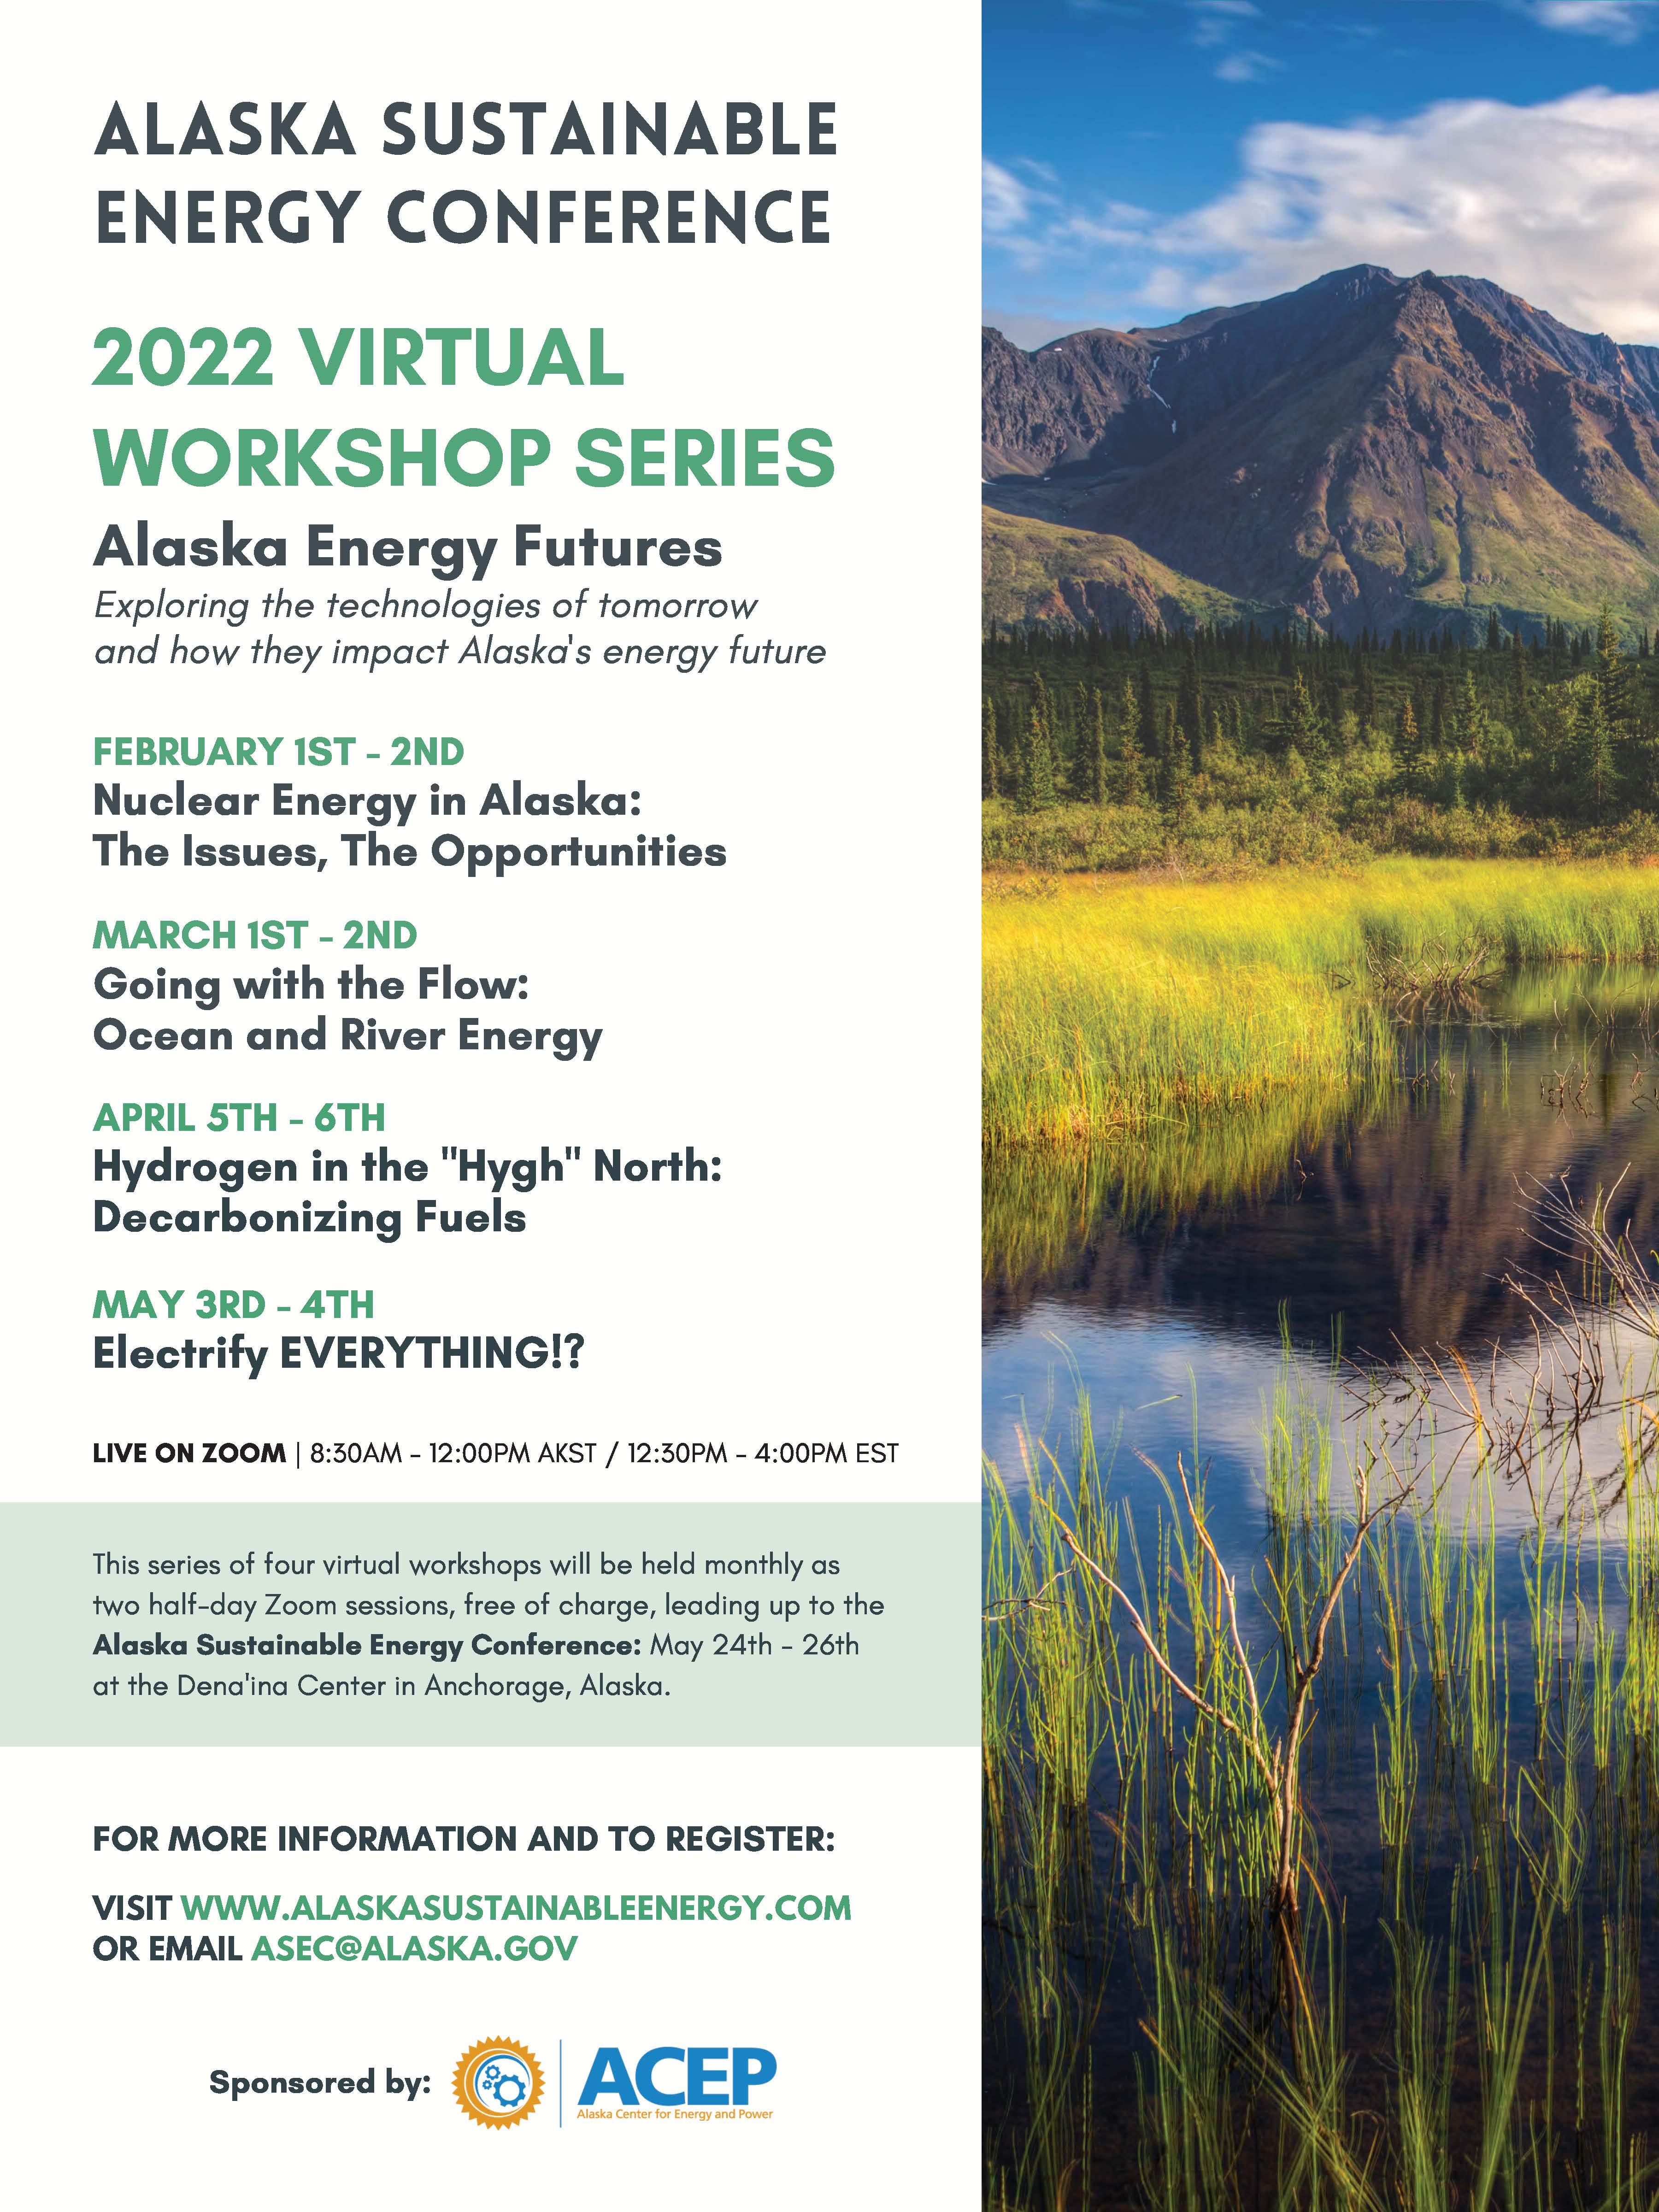 2022 Virtual Workshop Series - Part of the Alaska Sustainable Energy Conference